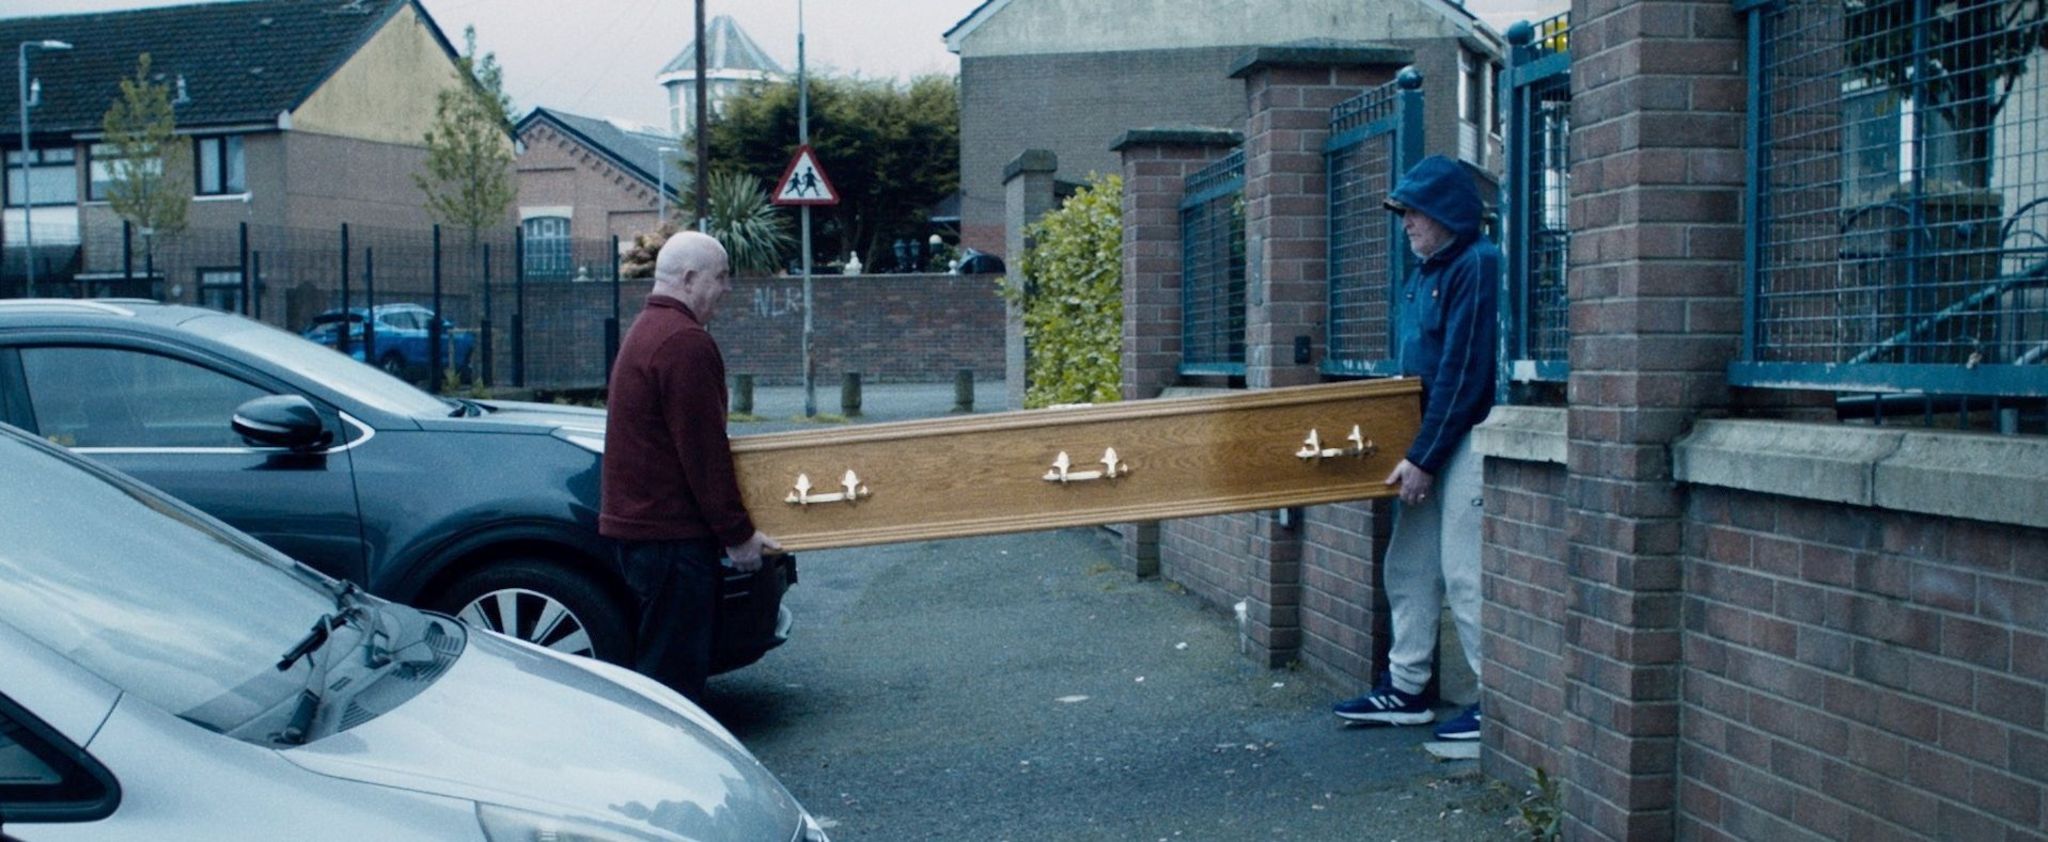 The flats - two men carrying coffin into New Lodge estate